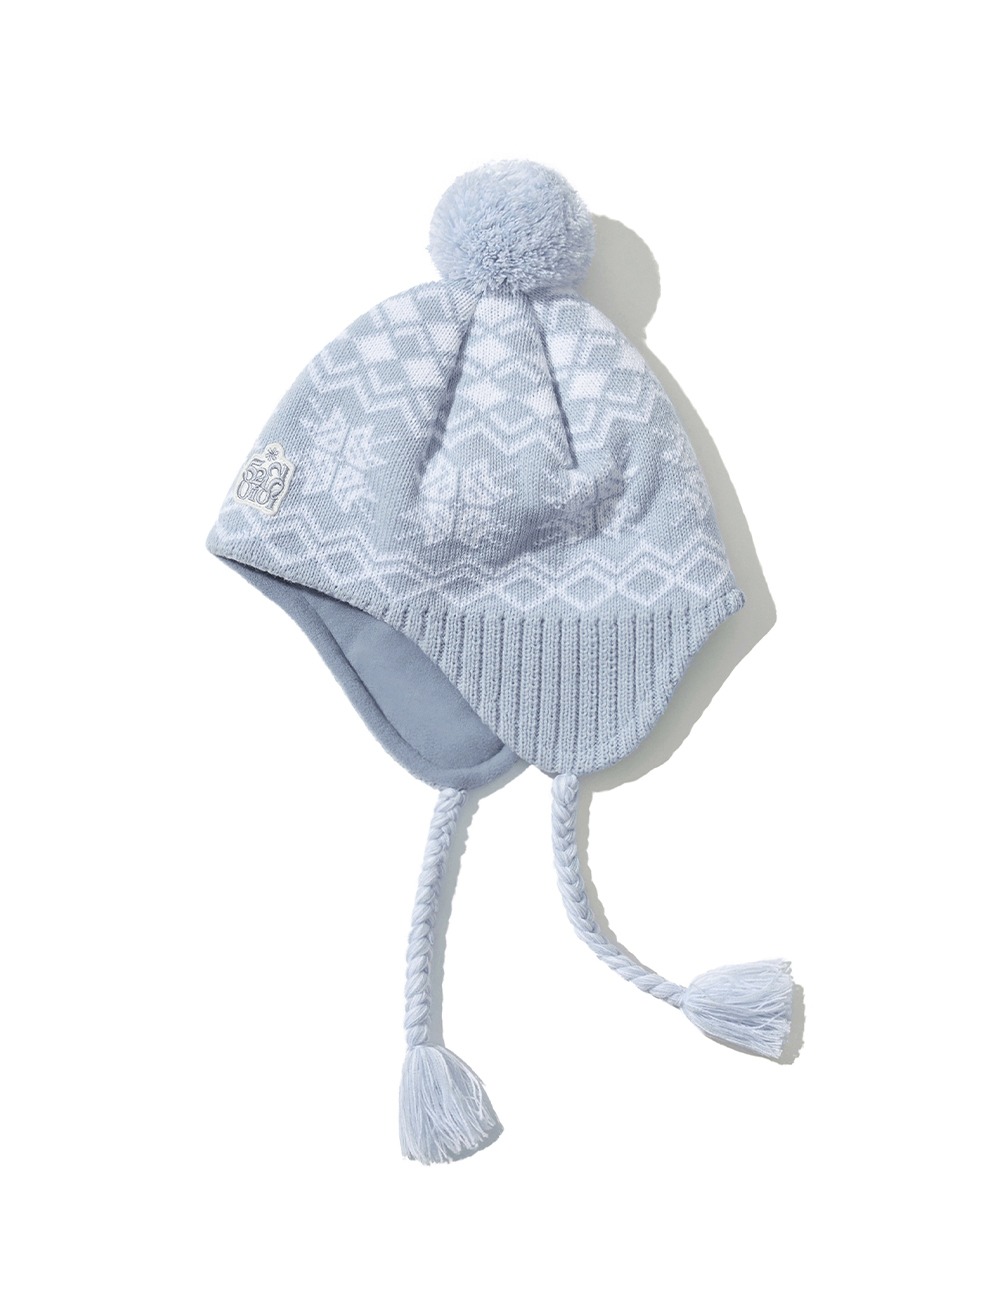 HOLIDAY NORDIC EARFLAP BEANIE [LIGHT BLUE]